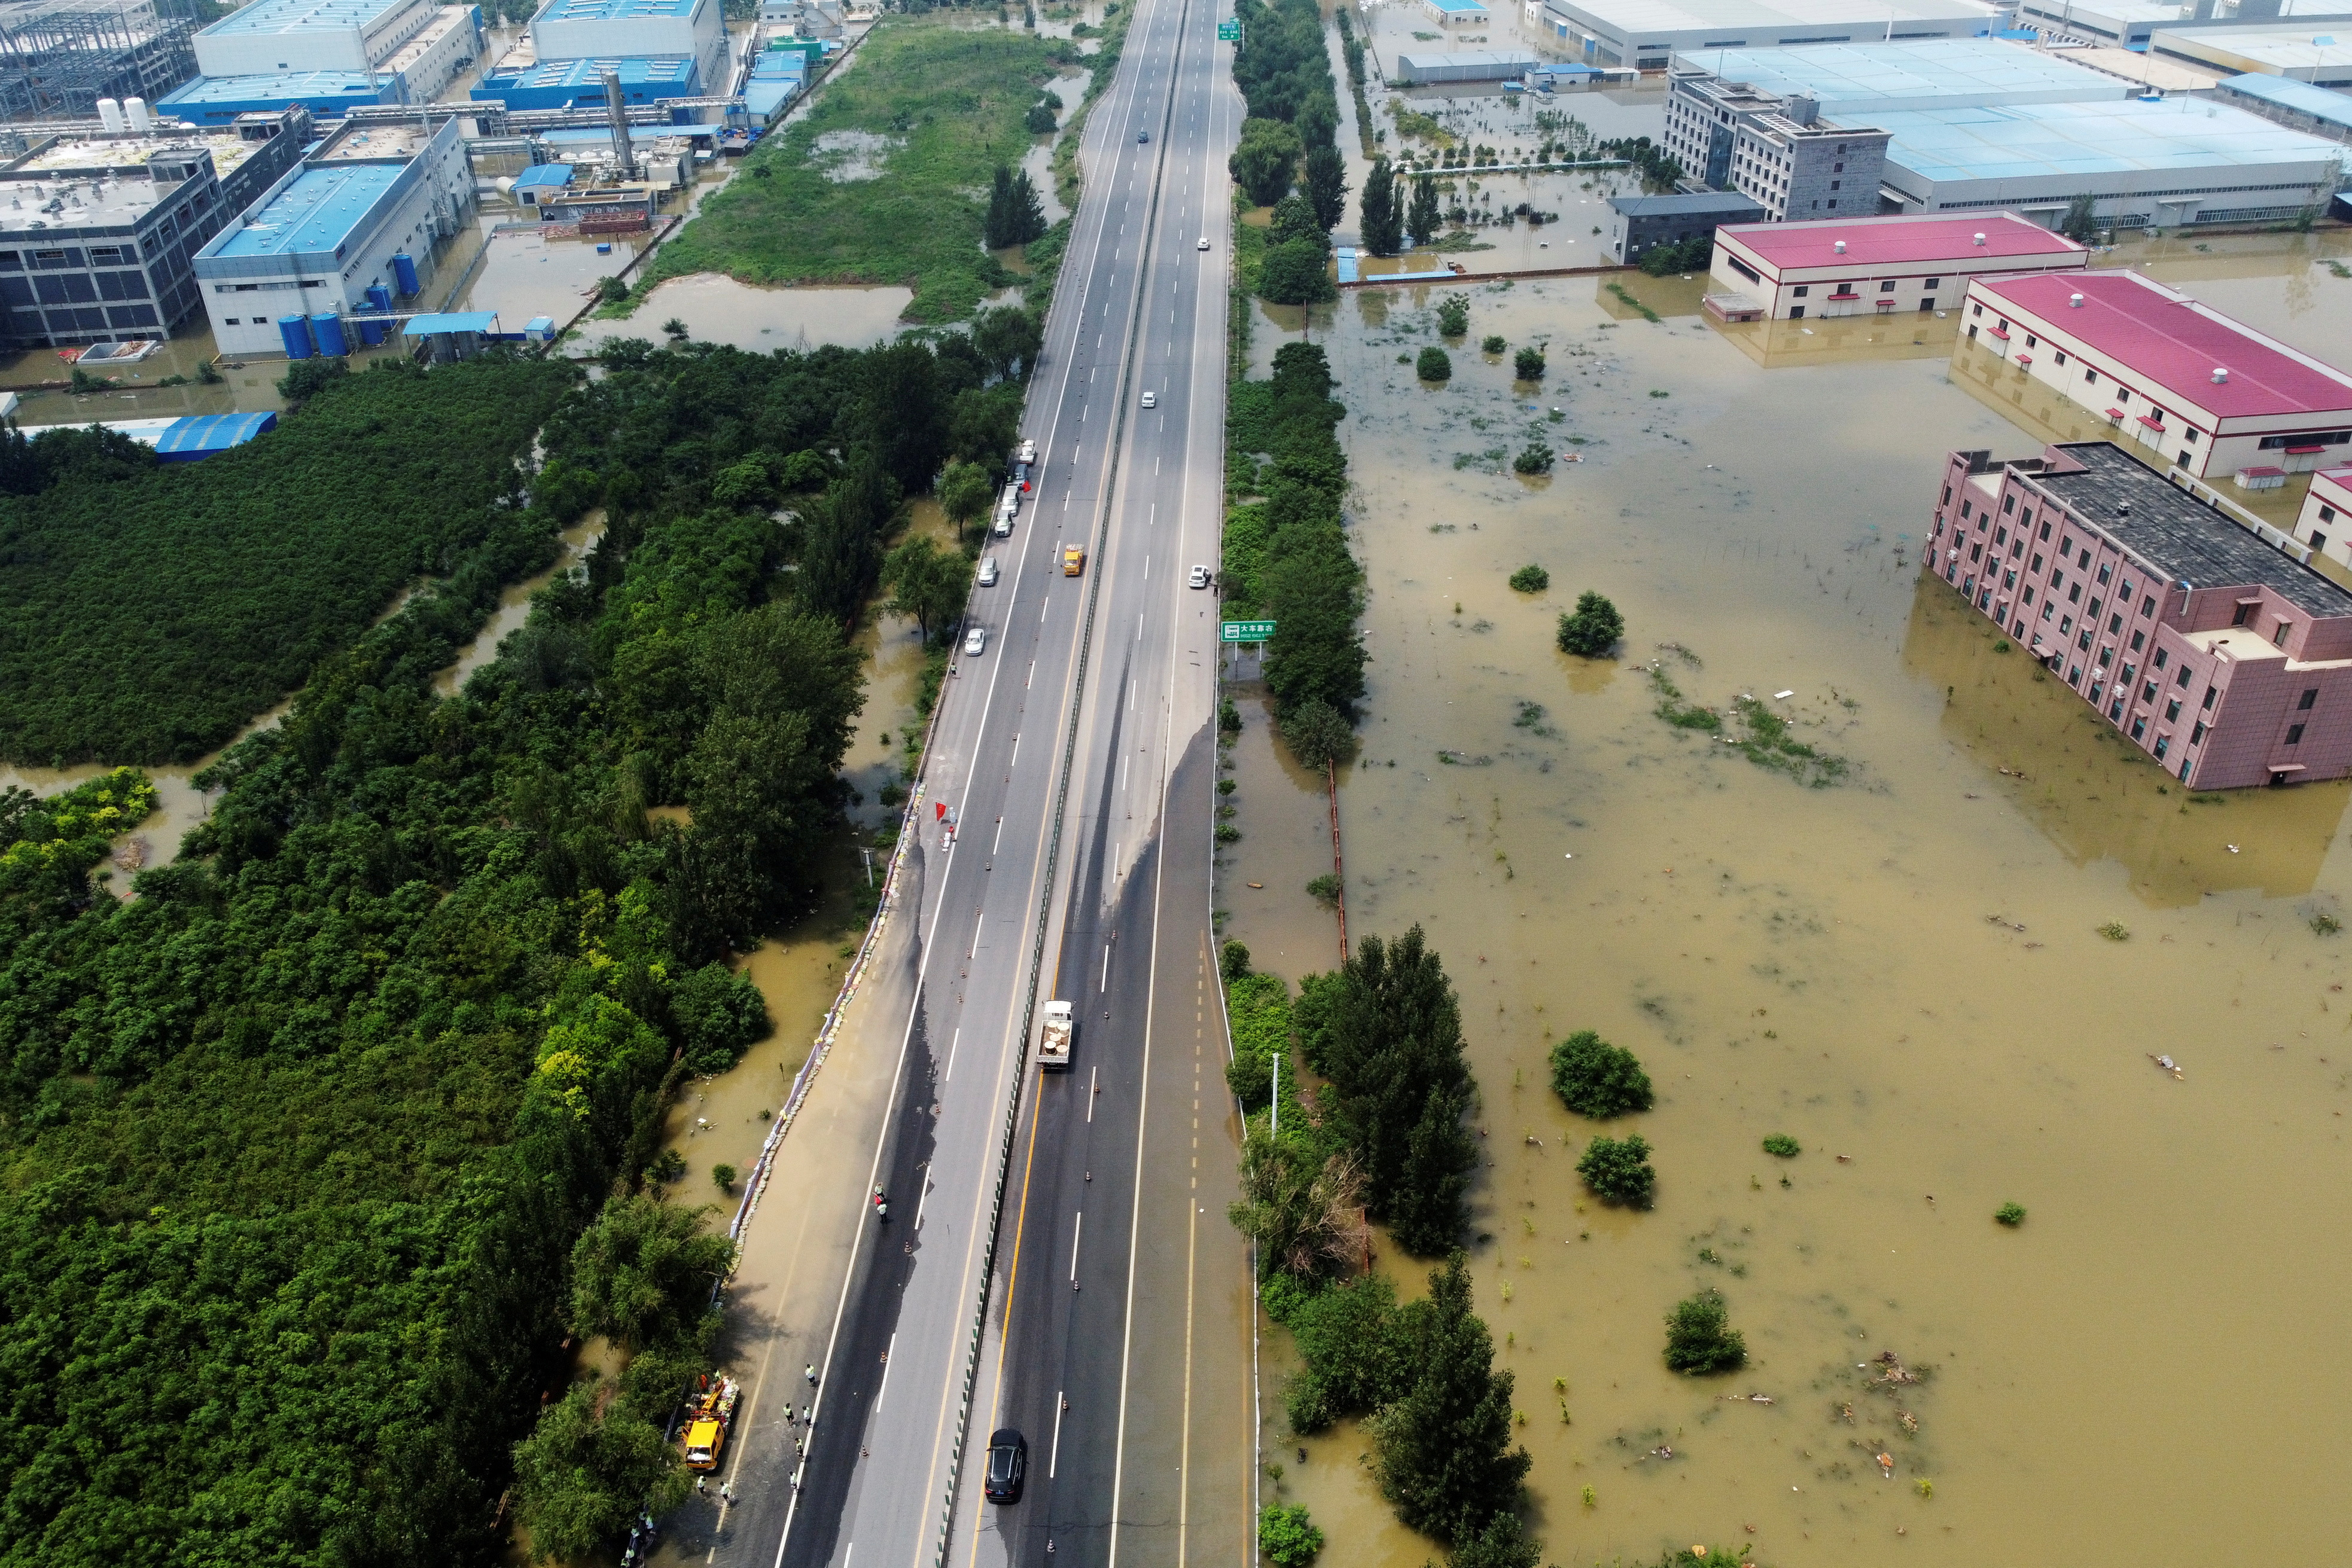 Aerial view shows flooded industrial buildings by a highway following heavy rainfall in Xinxiang